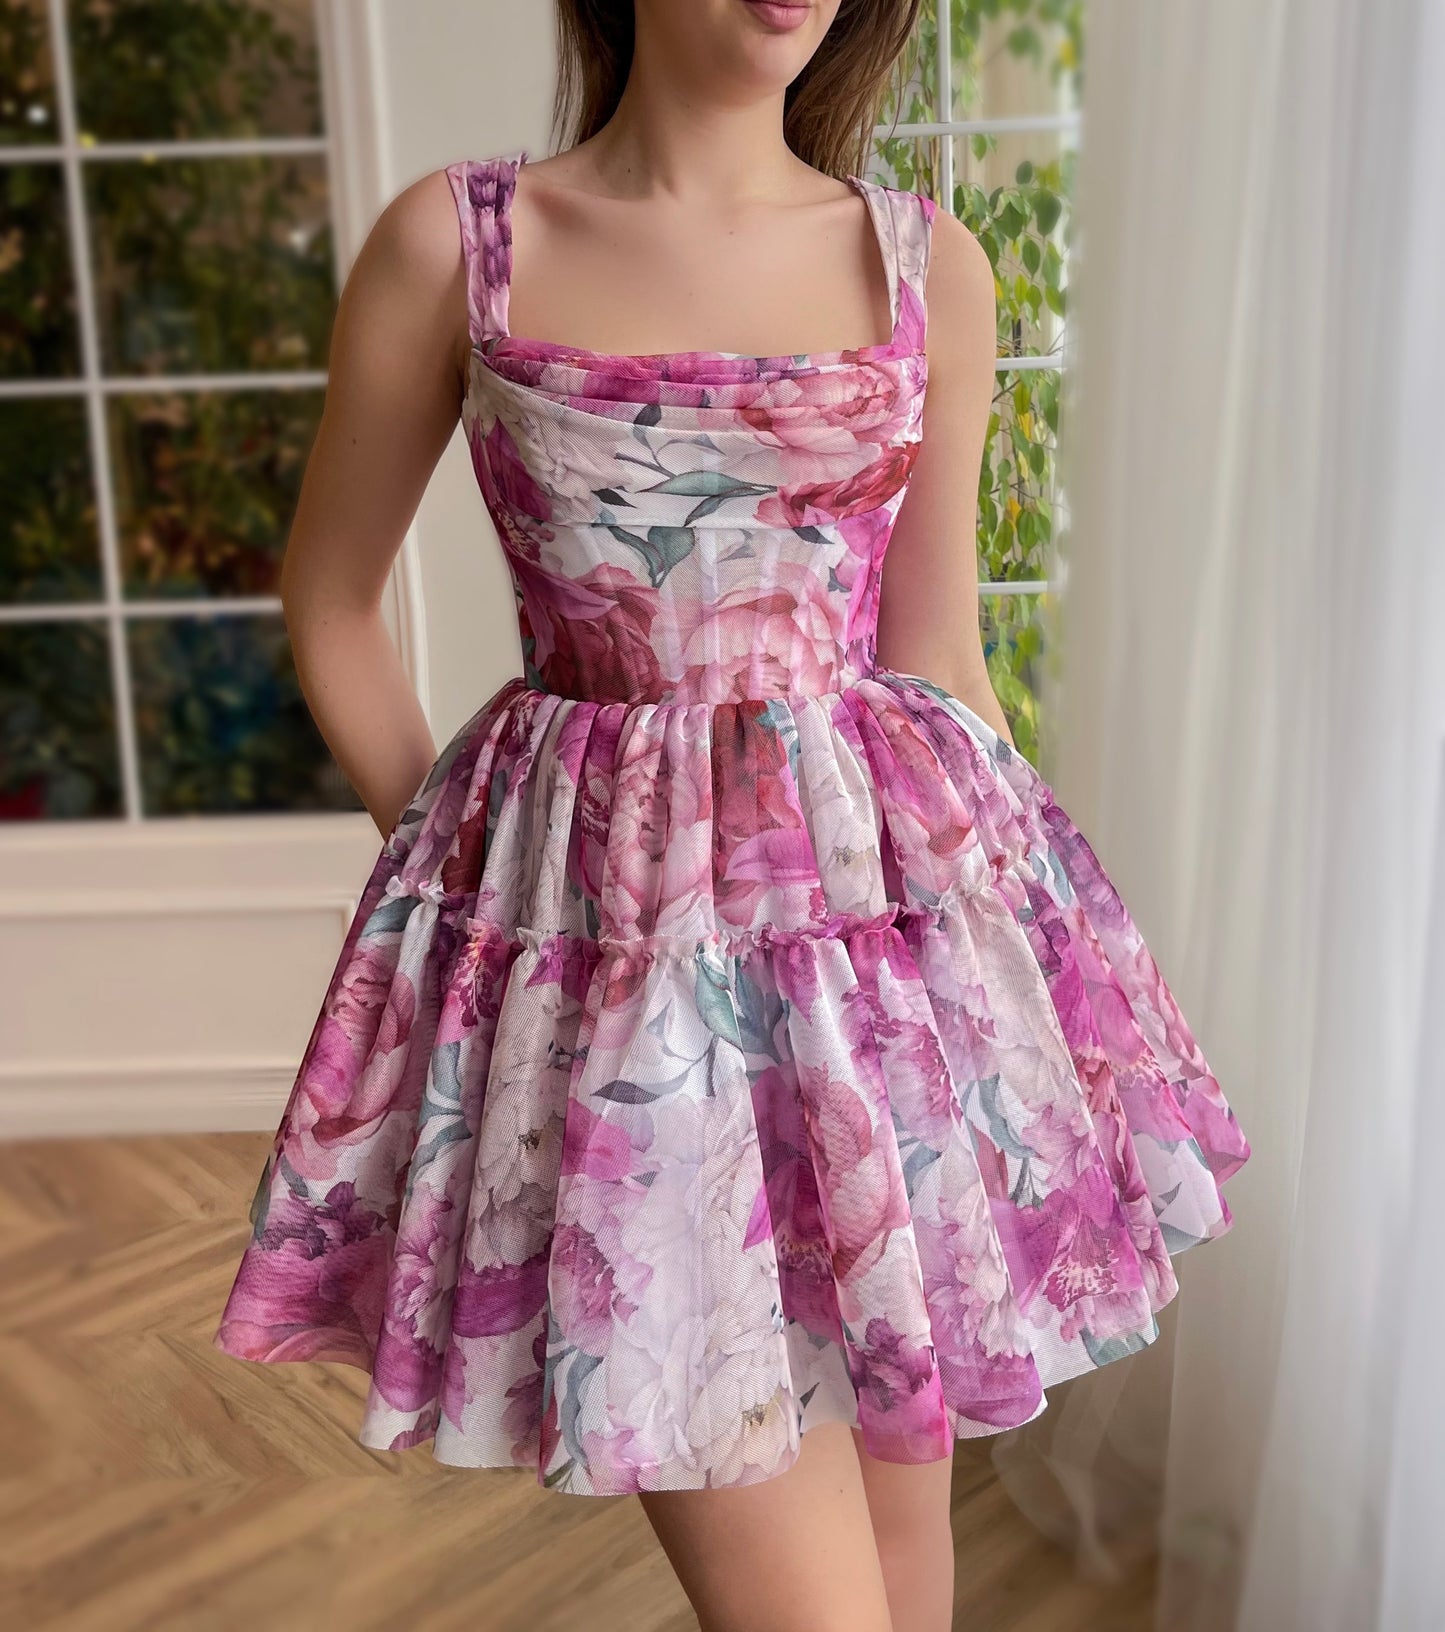 Pink mini dress with printed flowers and straps